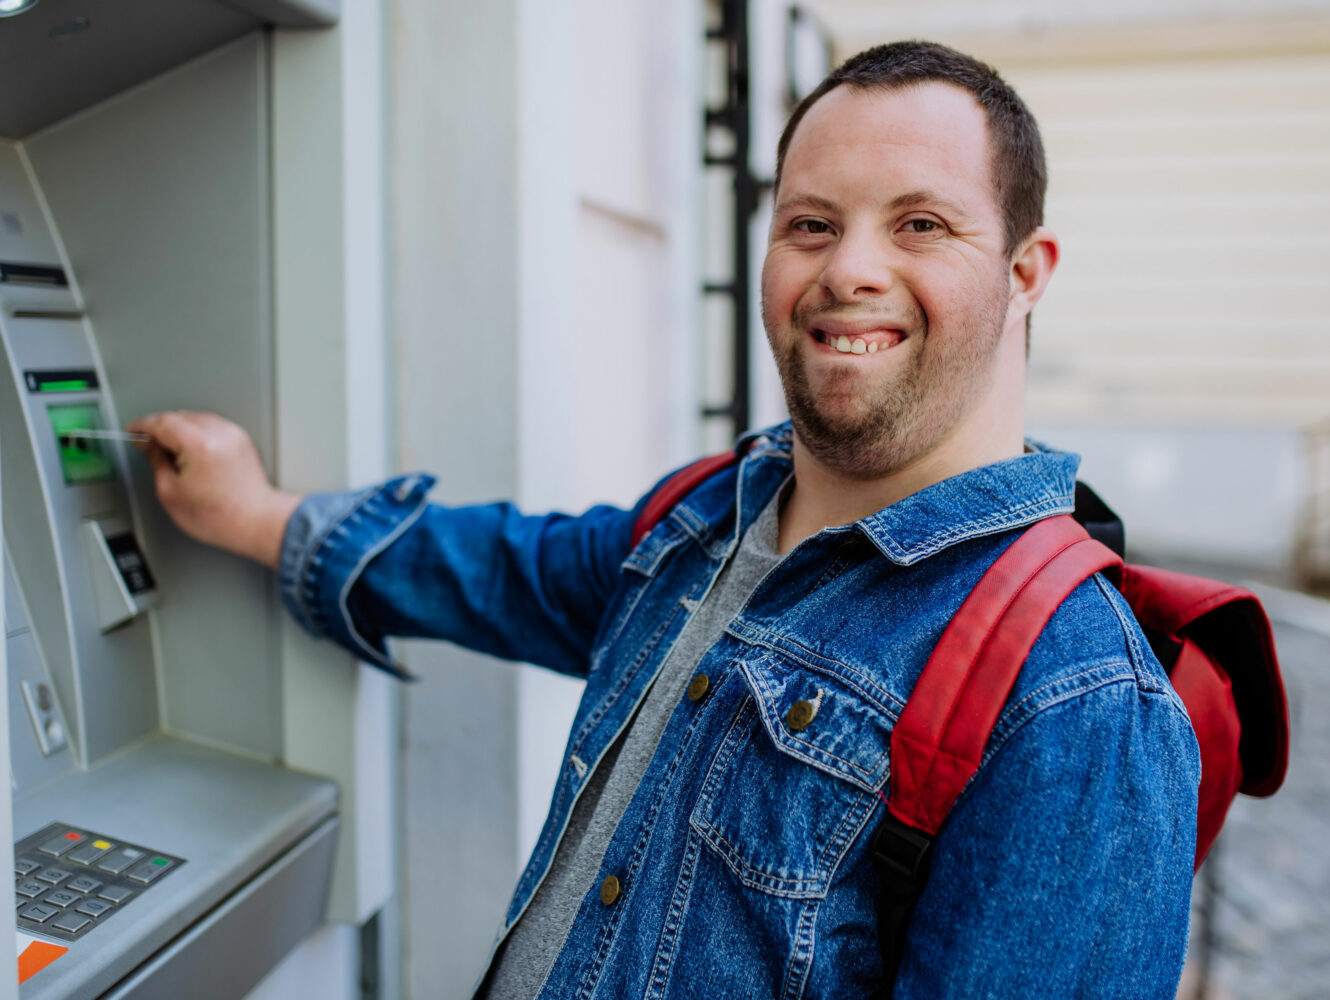 white man with Down syndrome wearing jean jacket and red backpack puts card in ATM